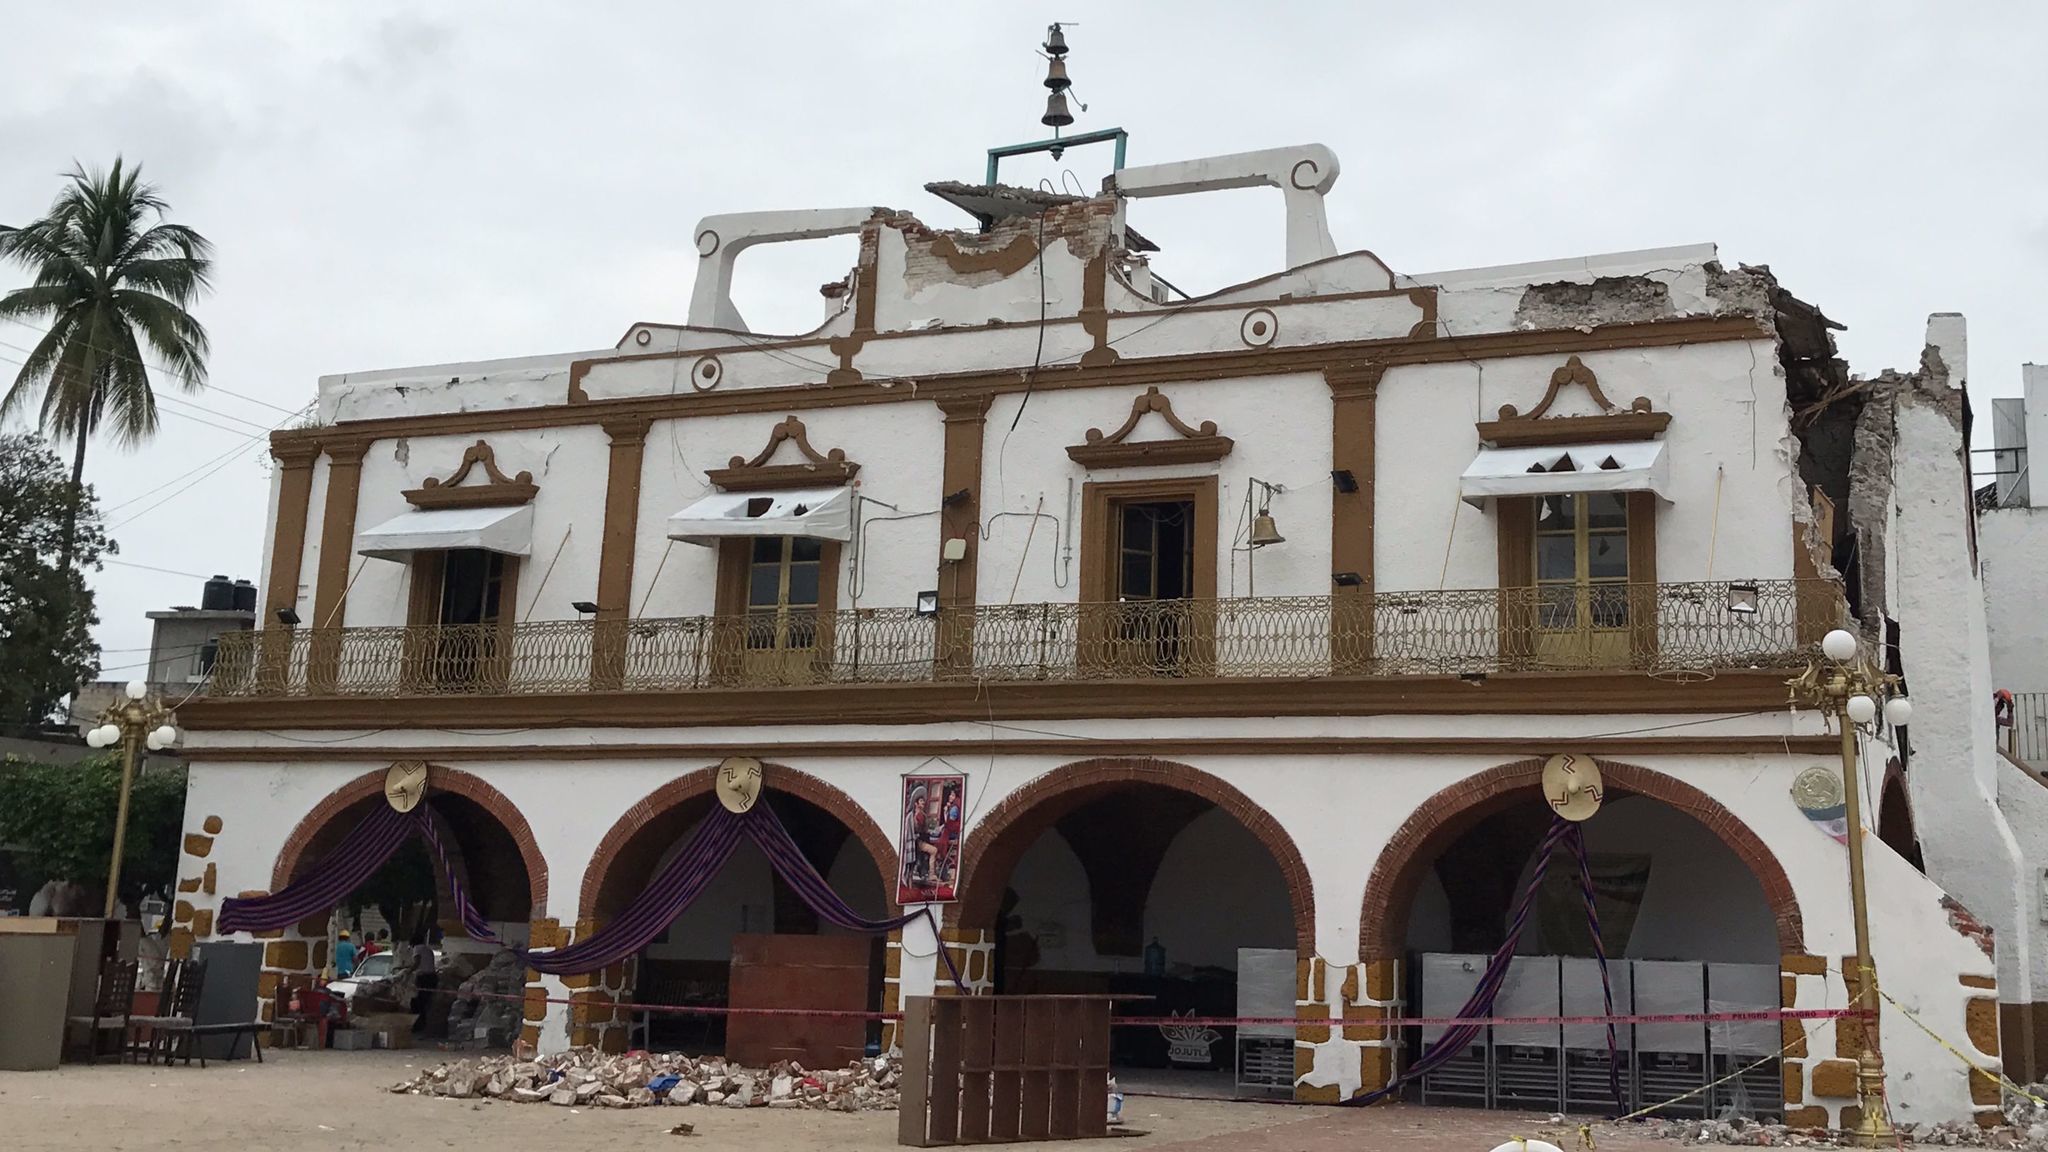 Jojutla town hall on Sept. 28, 2017. The Sept. 19 earthquake caused the clock tower to collapse, sending bricks to tumble on the square below, killing three people as they fled the building.